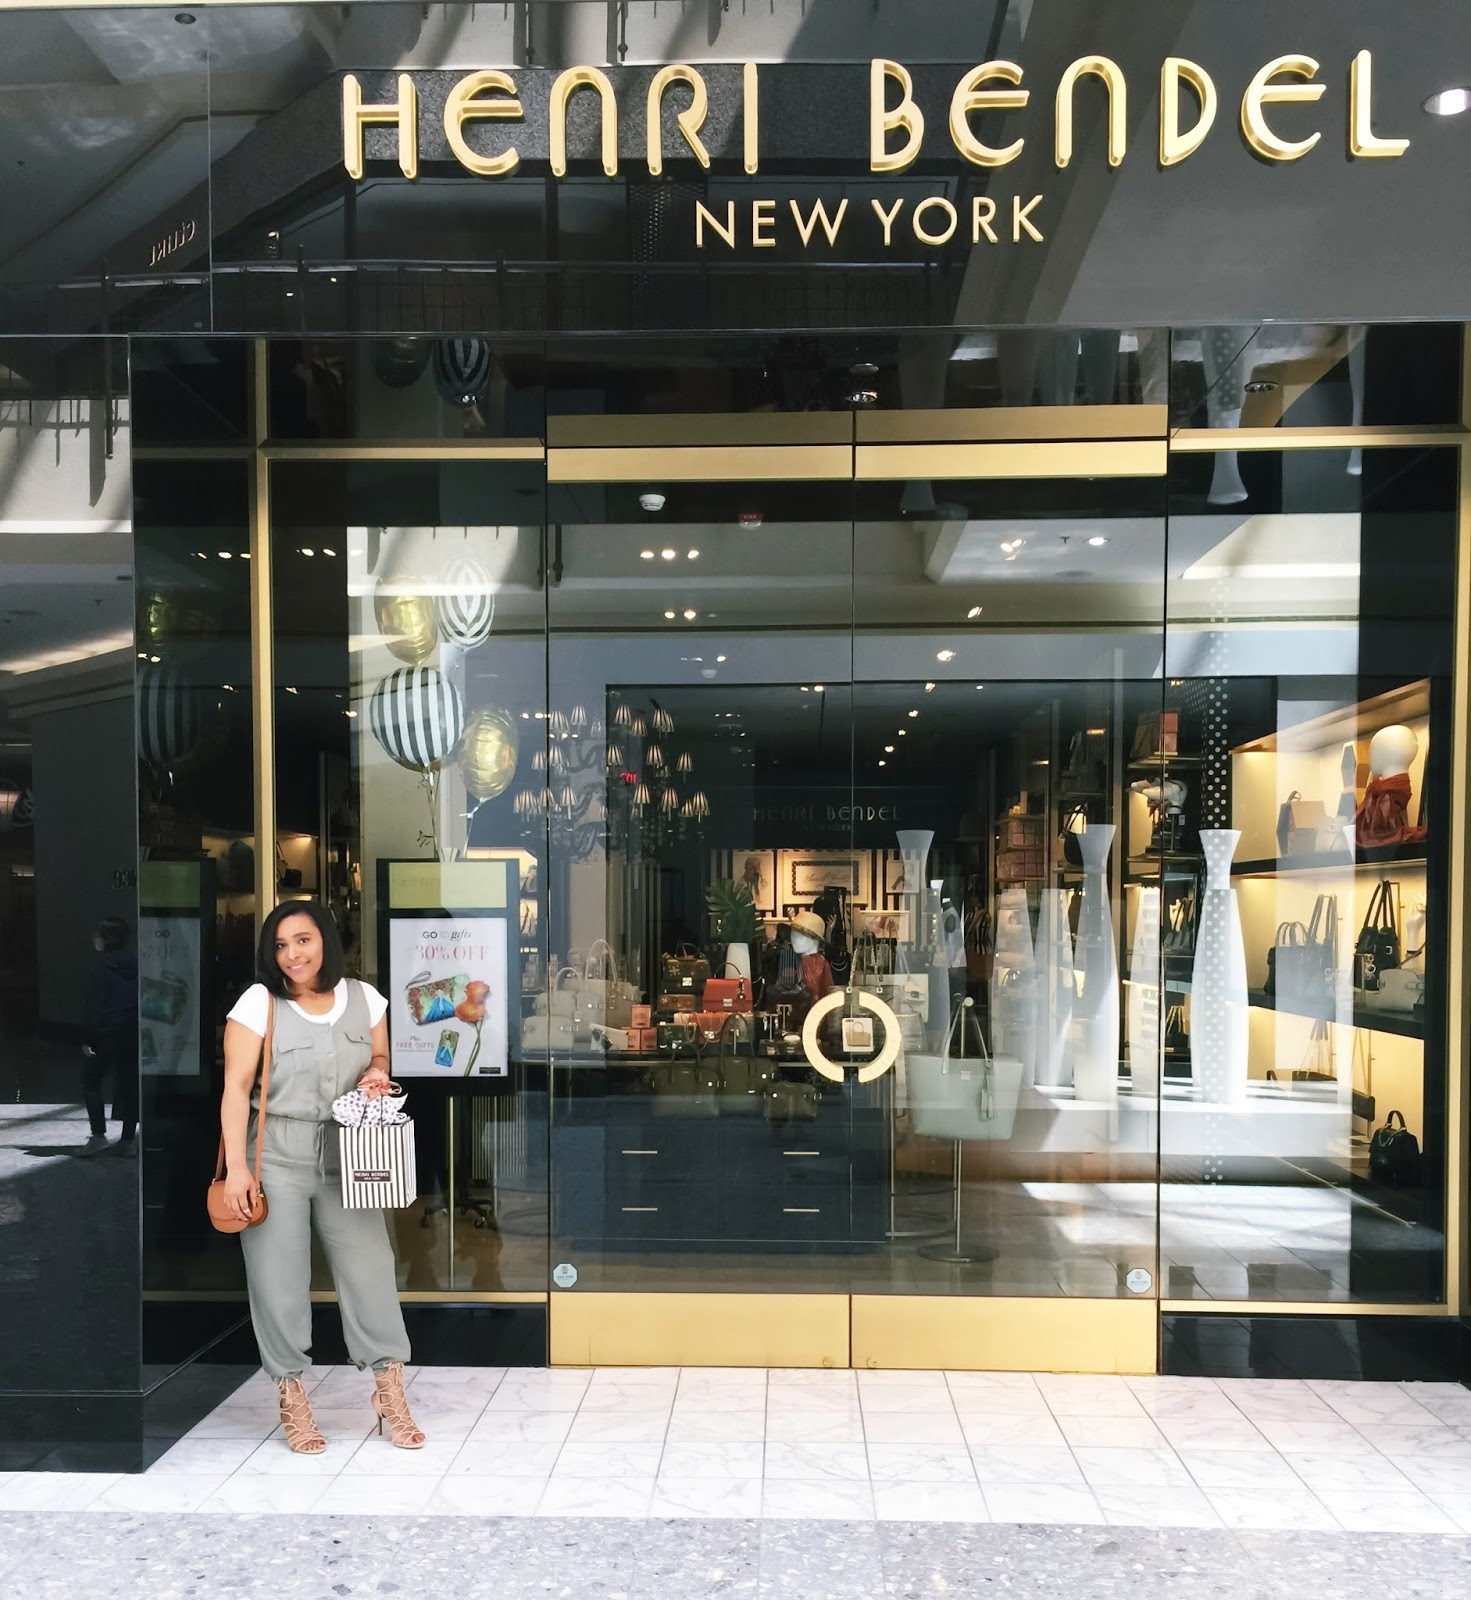 Sips, Sweets, And Shopping With Henri Bendel, tyson corner, shopping, westfield mall, bendel girl, Henri Bendel purses, blogger events